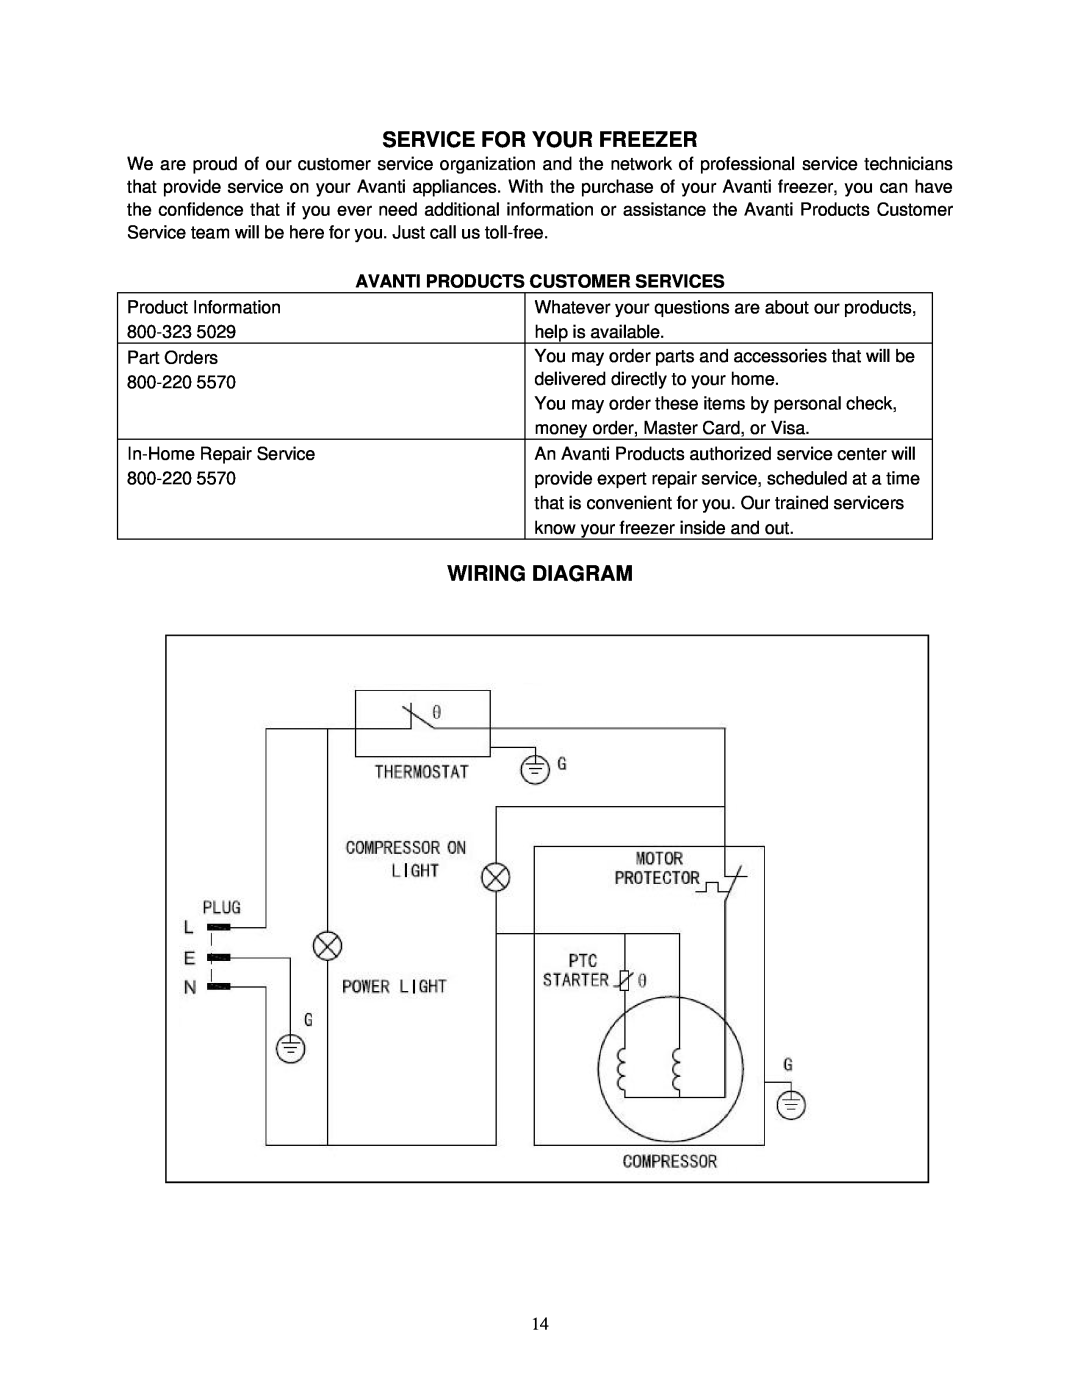 Avanti CF211G instruction manual Service For Your Freezer, Wiring Diagram, Avanti Products Customer Services 